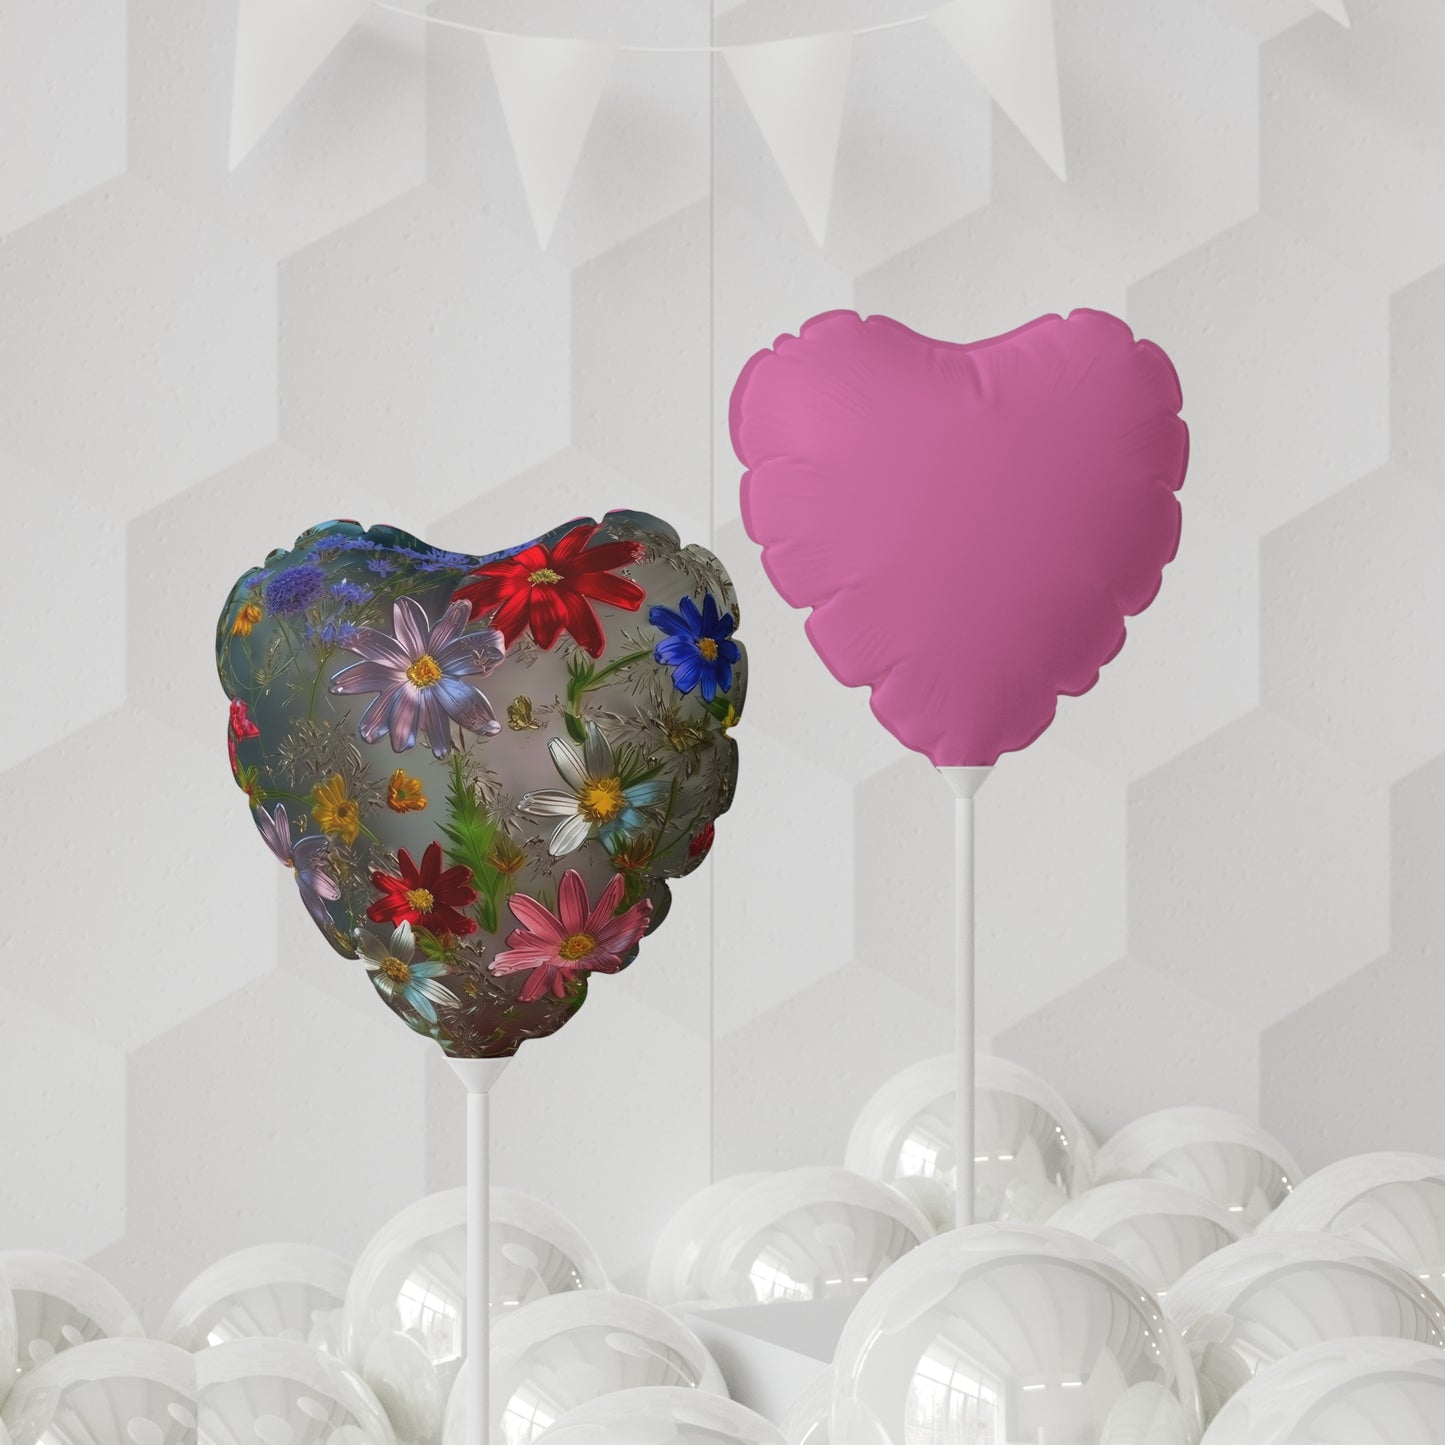 Bold & Beautiful & Metallic Wildflowers, Gorgeous floral Design, Style 6 Balloon (Round and Heart-shaped), 11"